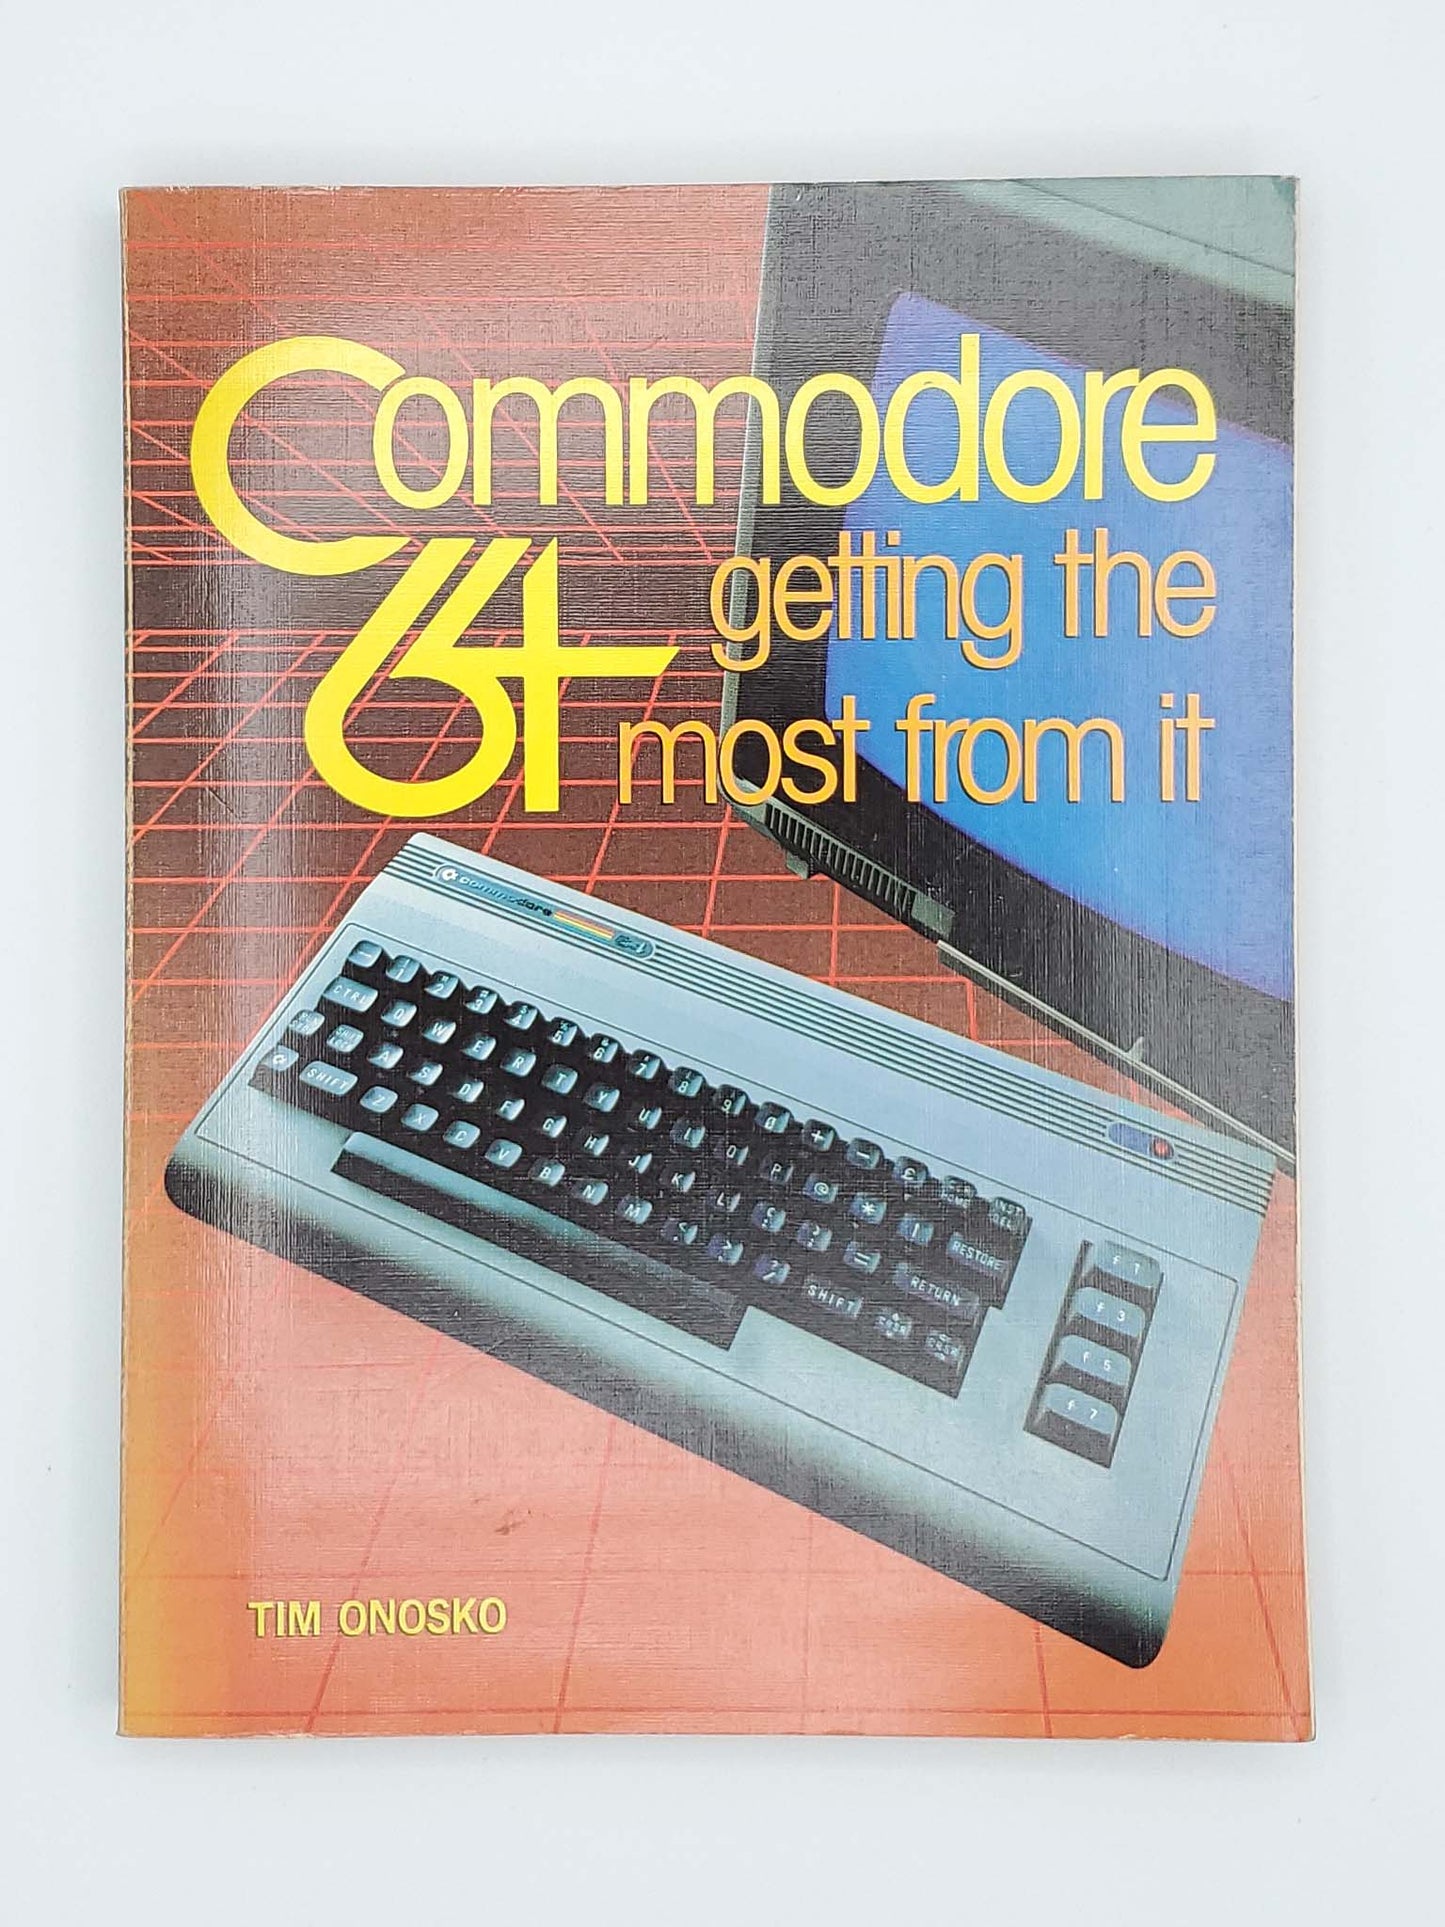 Commodore 64 - Getting the most from it by Tim Onosko